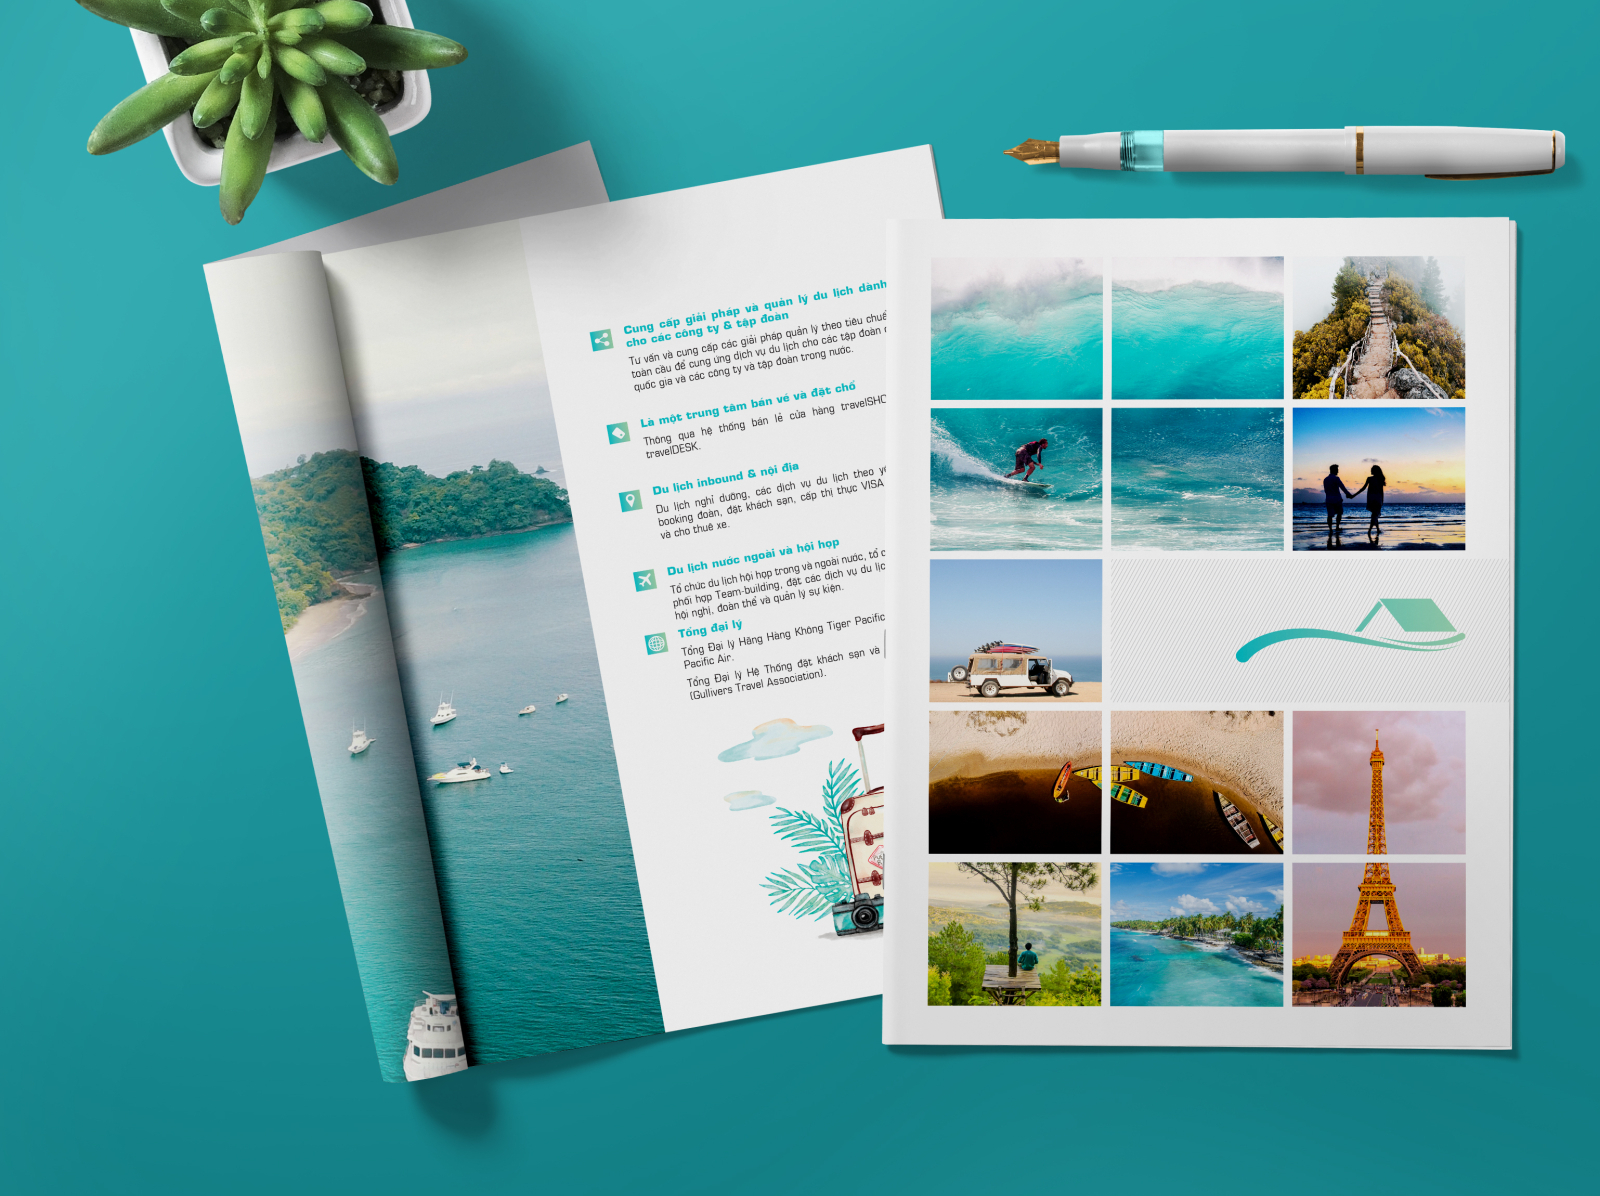 Template Company Profile Travel And Tours by Vien Nguyen on Dribbble